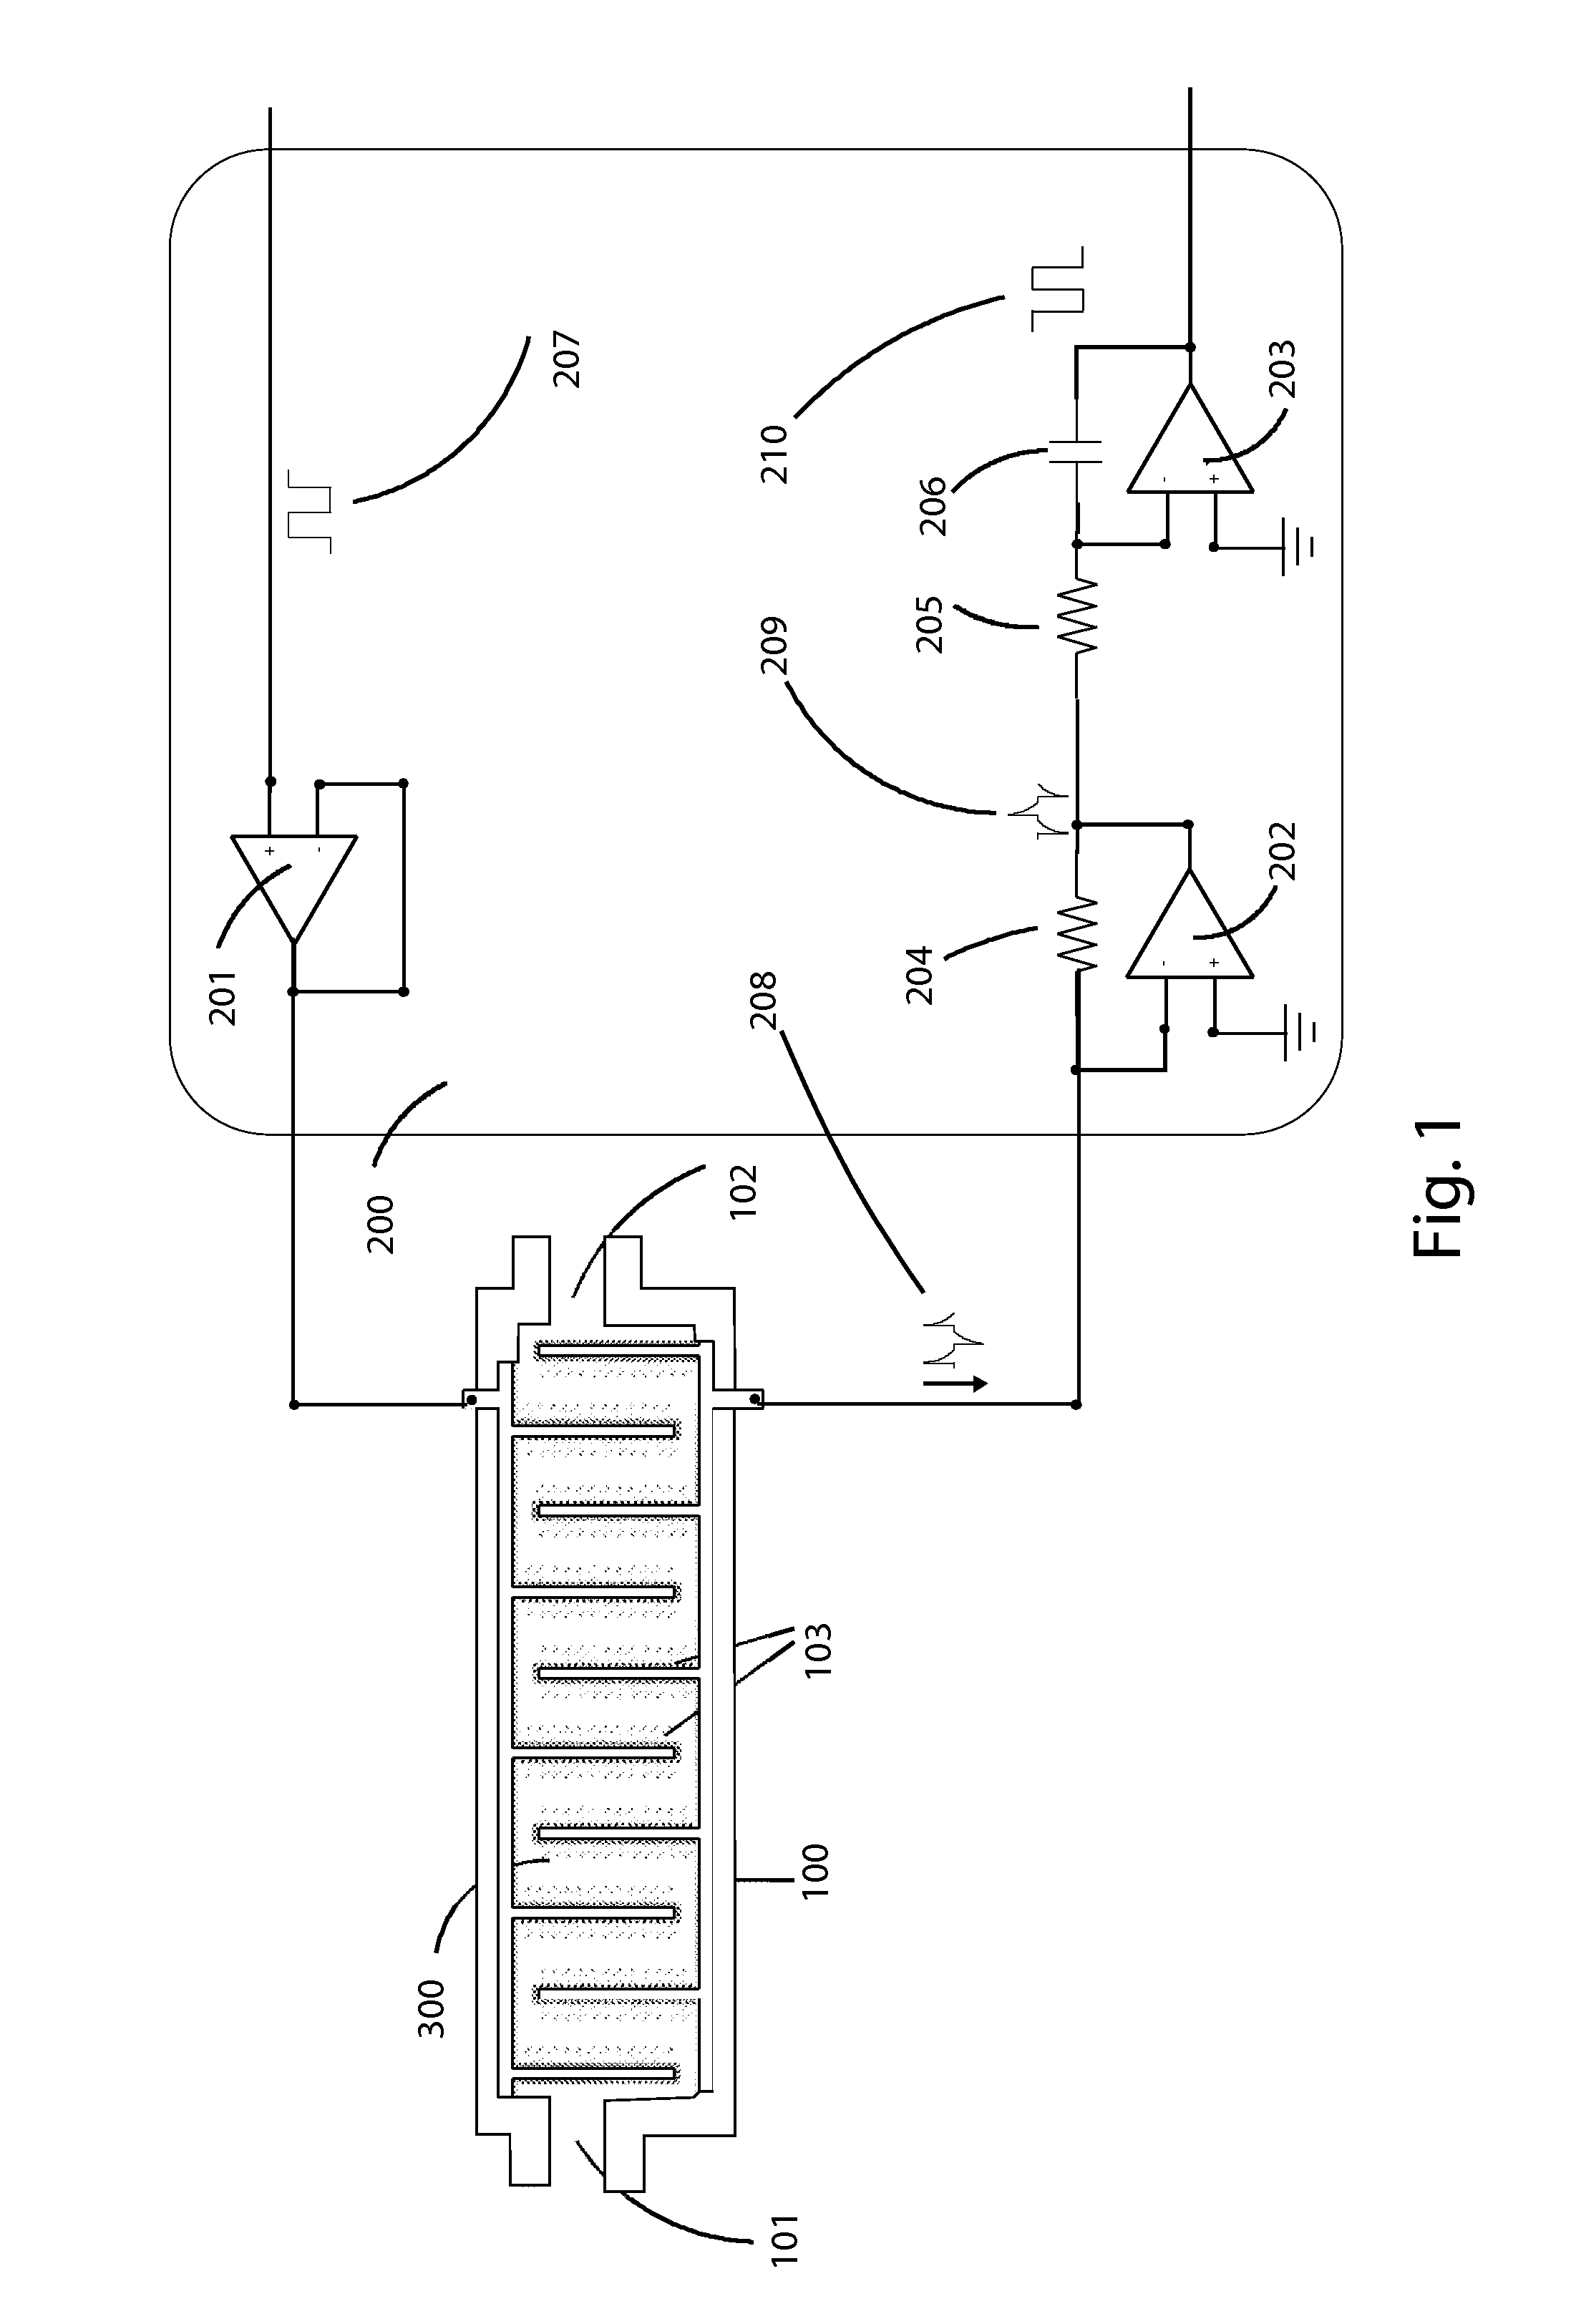 Method and apparatus for detecting and regulating vascular endothelial growth factor (VEGF) by forming a homeostatic loop employing a half-antibody biosensor